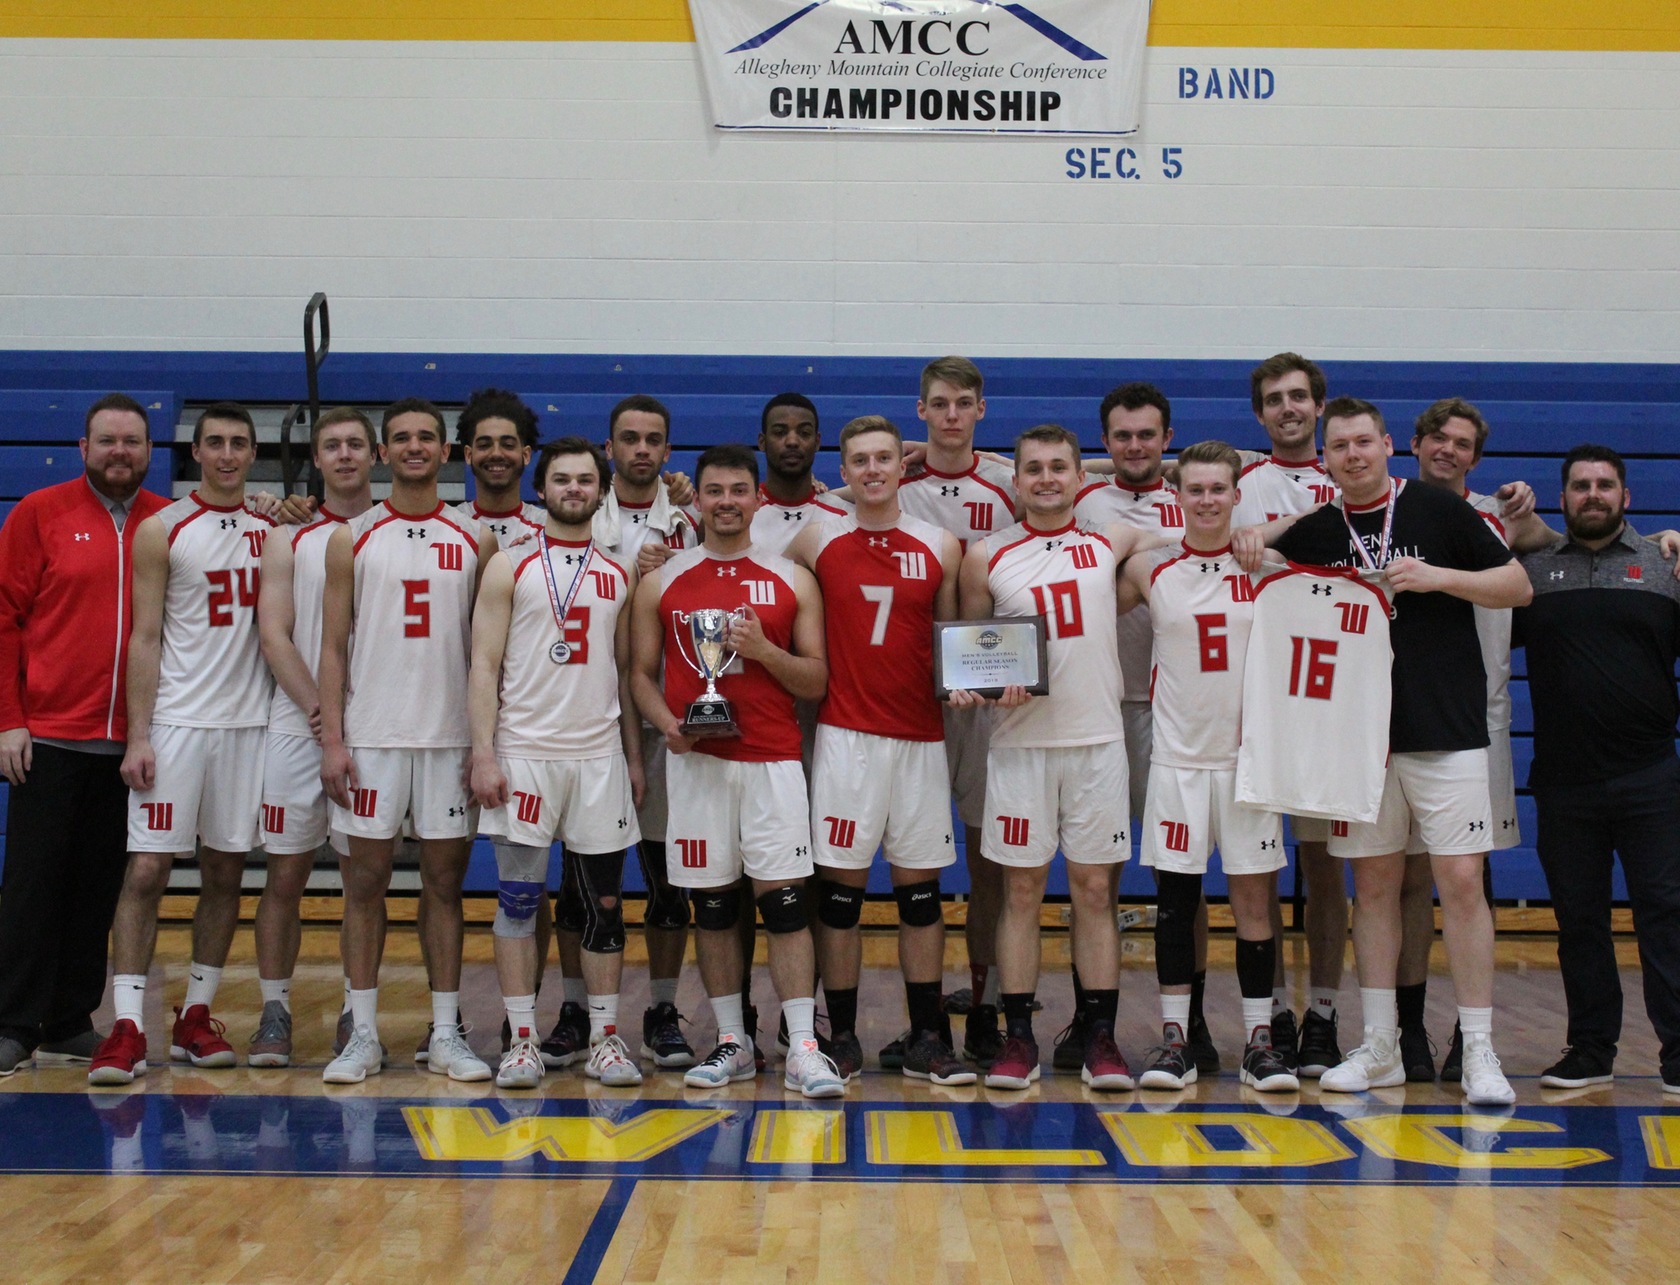 Despite dropping a 3-1 decision against Thiel in the AMCC Tournament championship match, Wittenberg was crowned the 2019 AMCC regular season champions with an 11-3 record on the year in league play